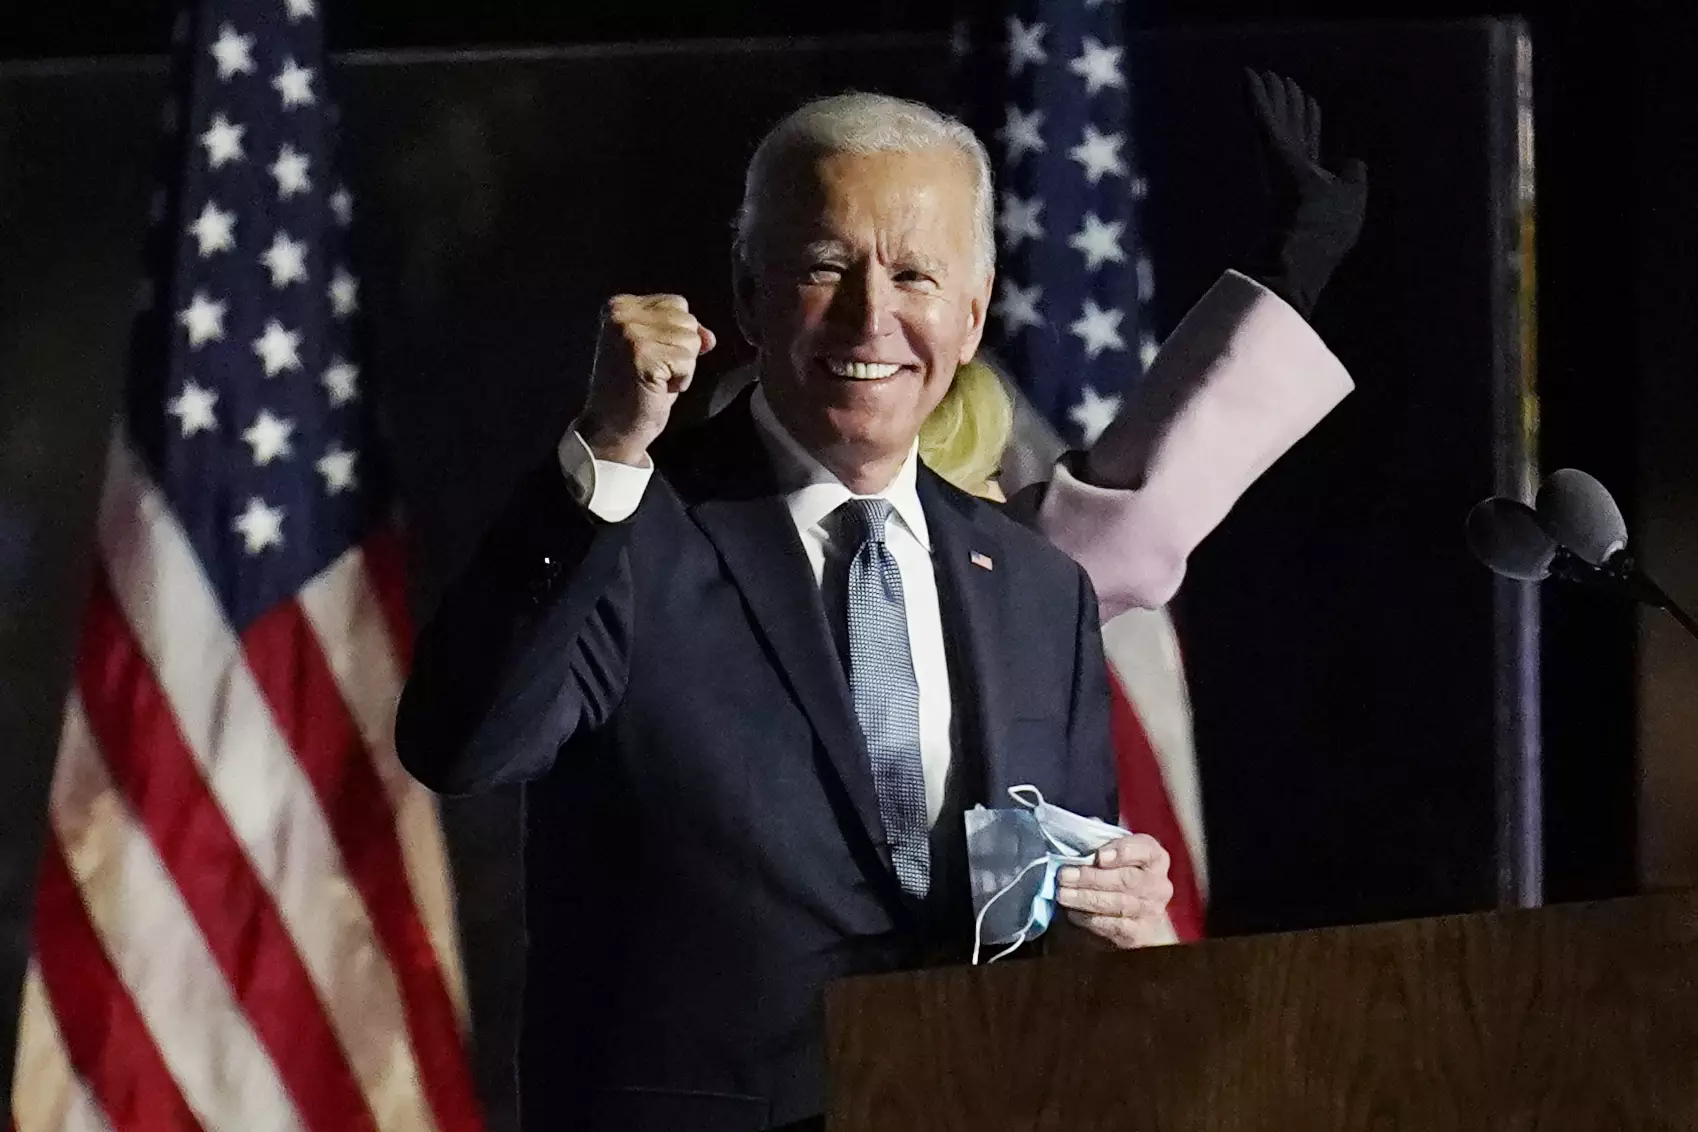 Joe Biden says he's 'on track' to win the 2020 election.